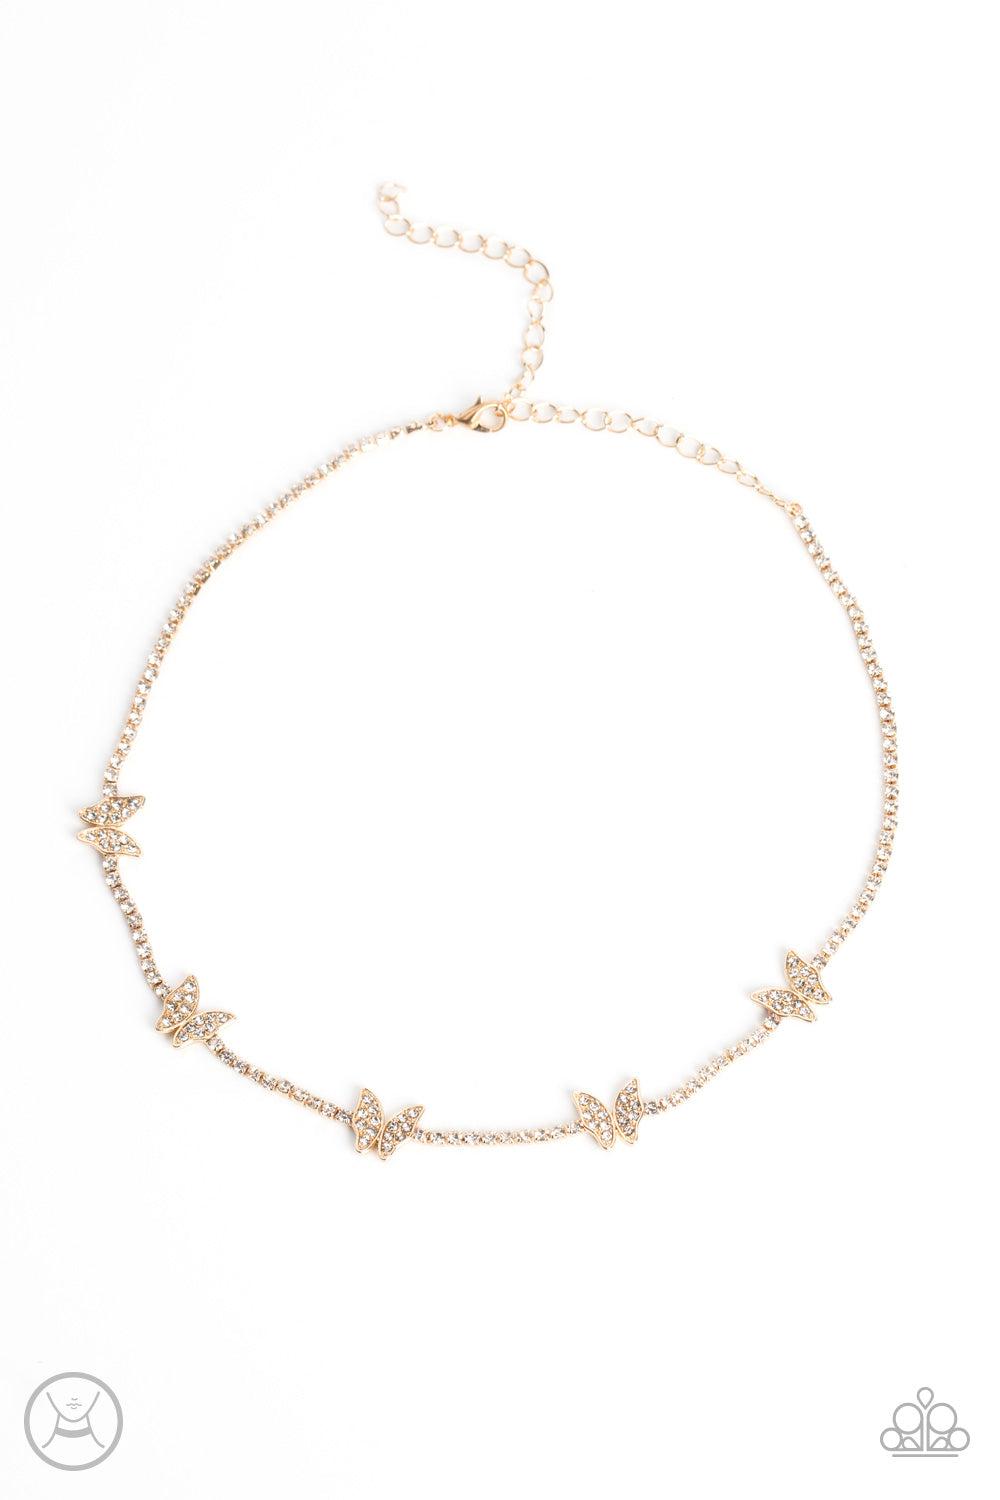 Fluttering Fanatic Gold & White Rhinestone Butterfly Choker Necklace - Paparazzi Accessories- lightbox - CarasShop.com - $5 Jewelry by Cara Jewels